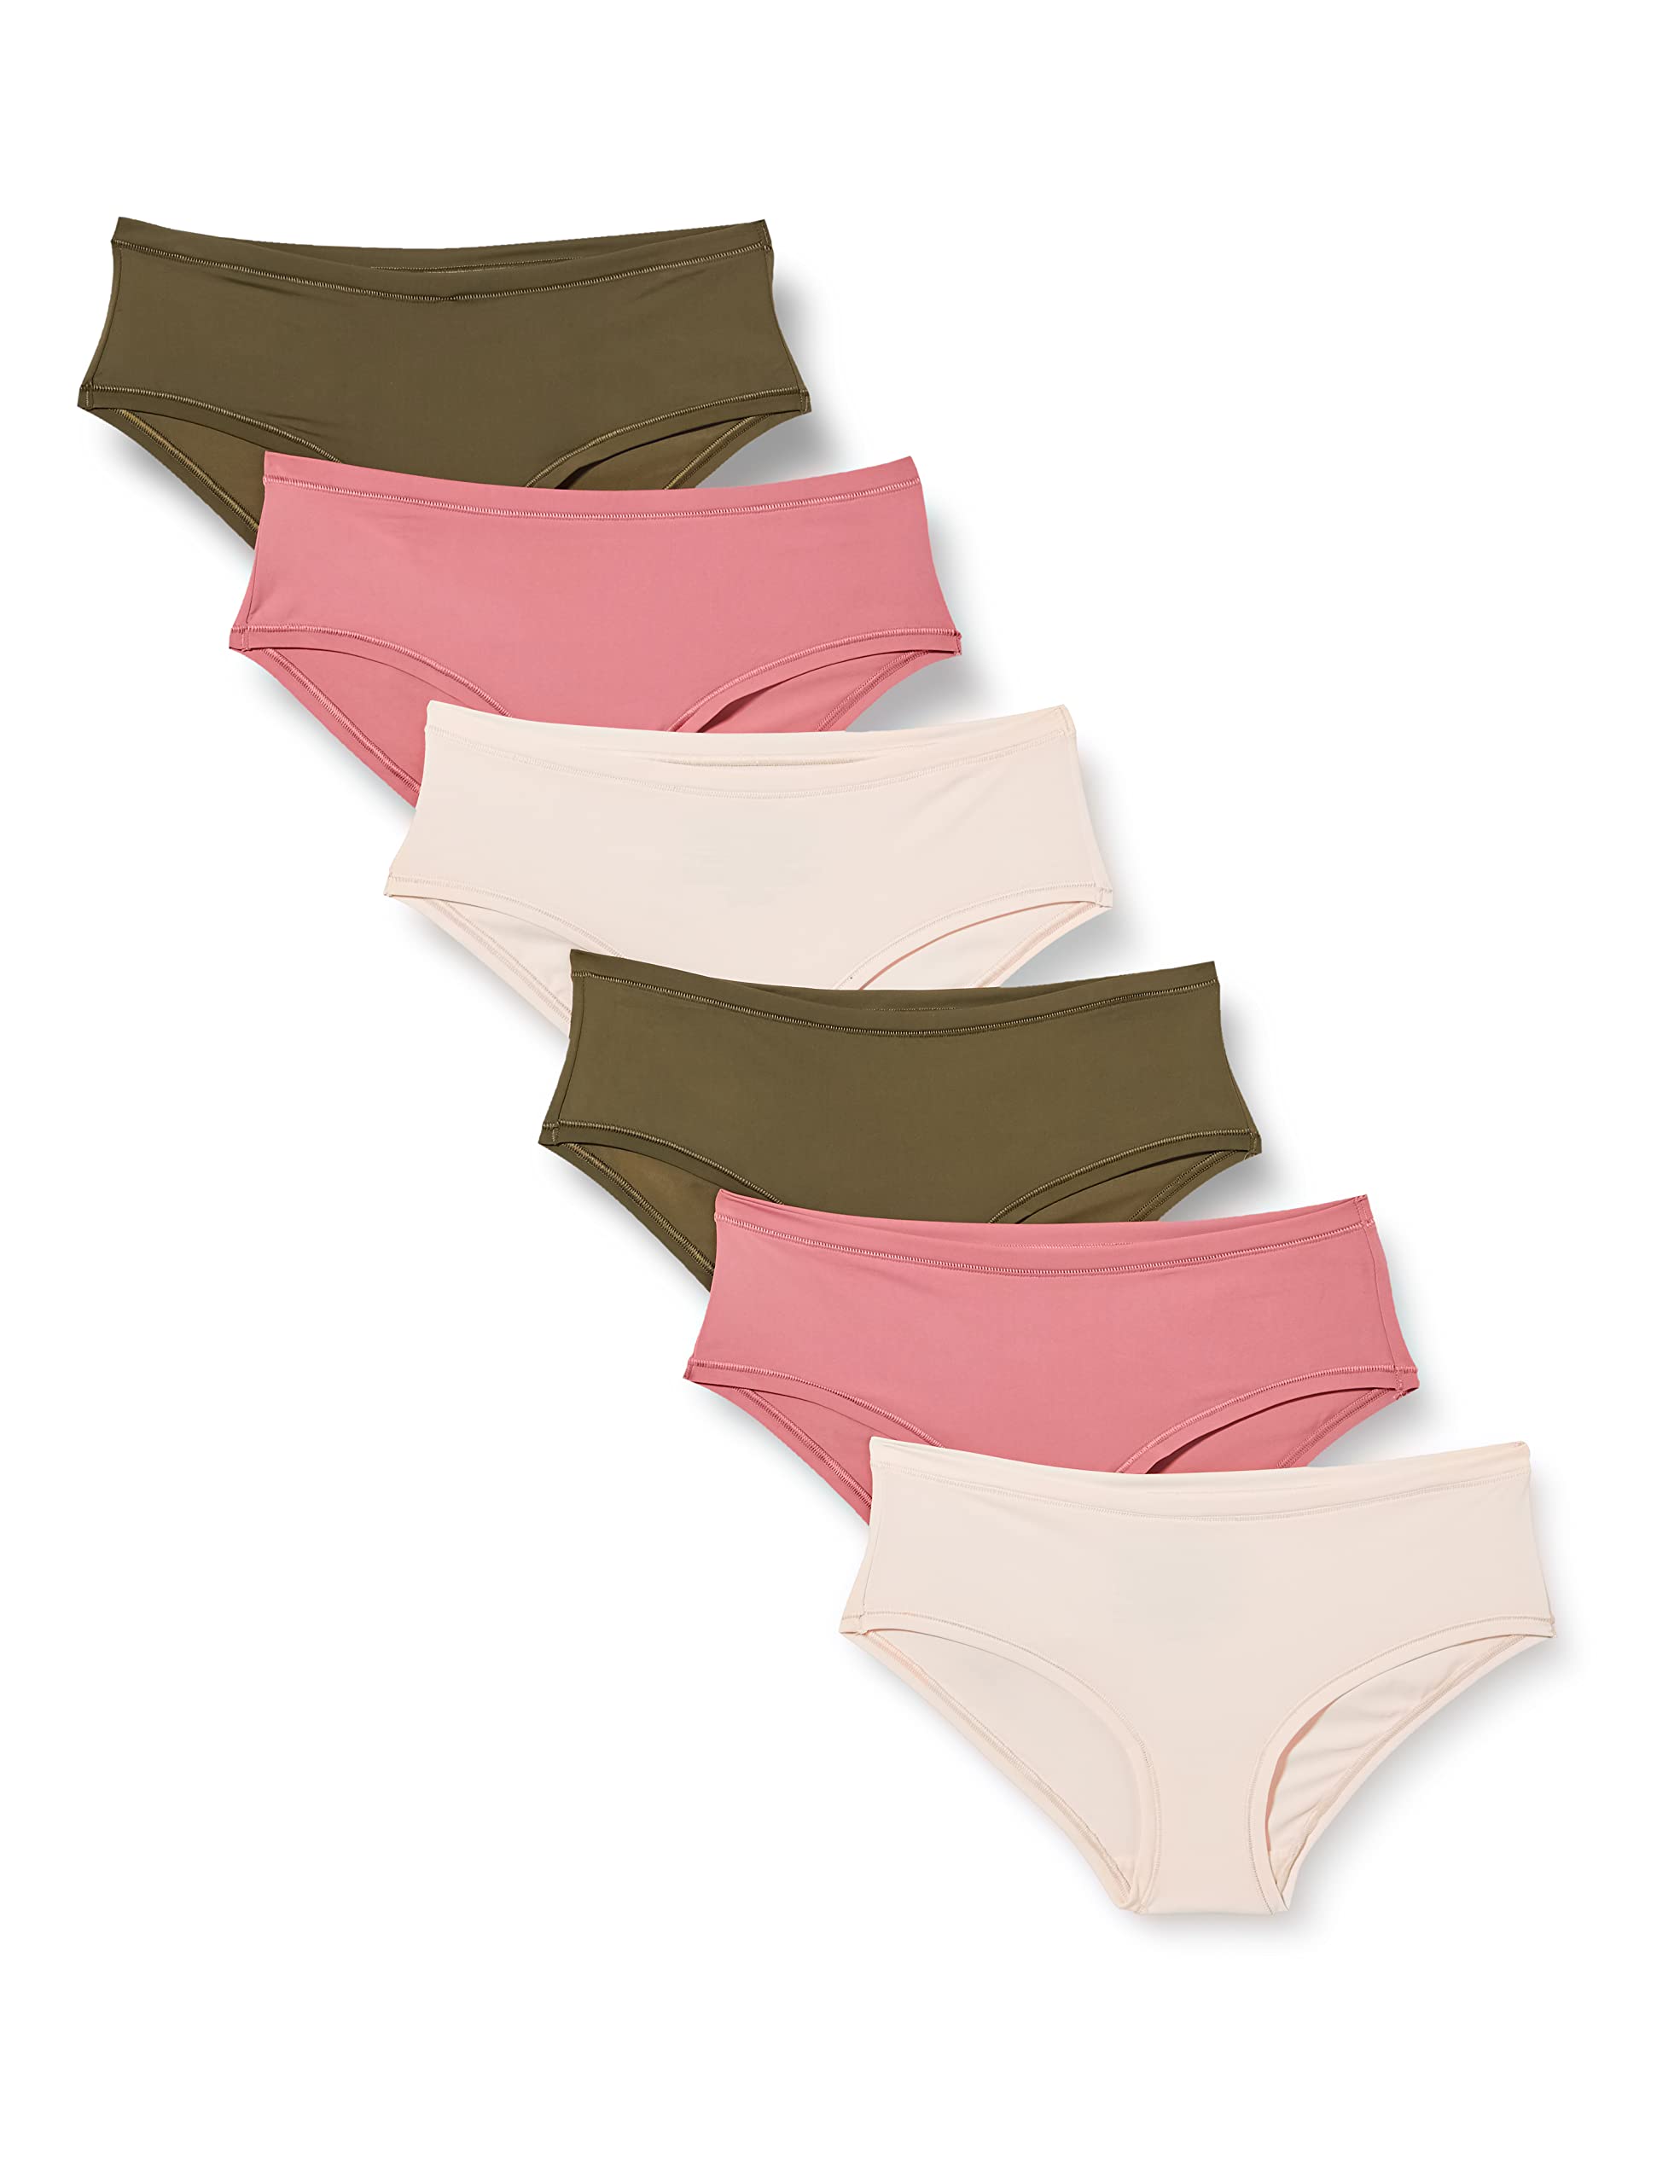 Amazon Essentials Women's Hipster Underwear (Available in Plus Size), Pack of 6